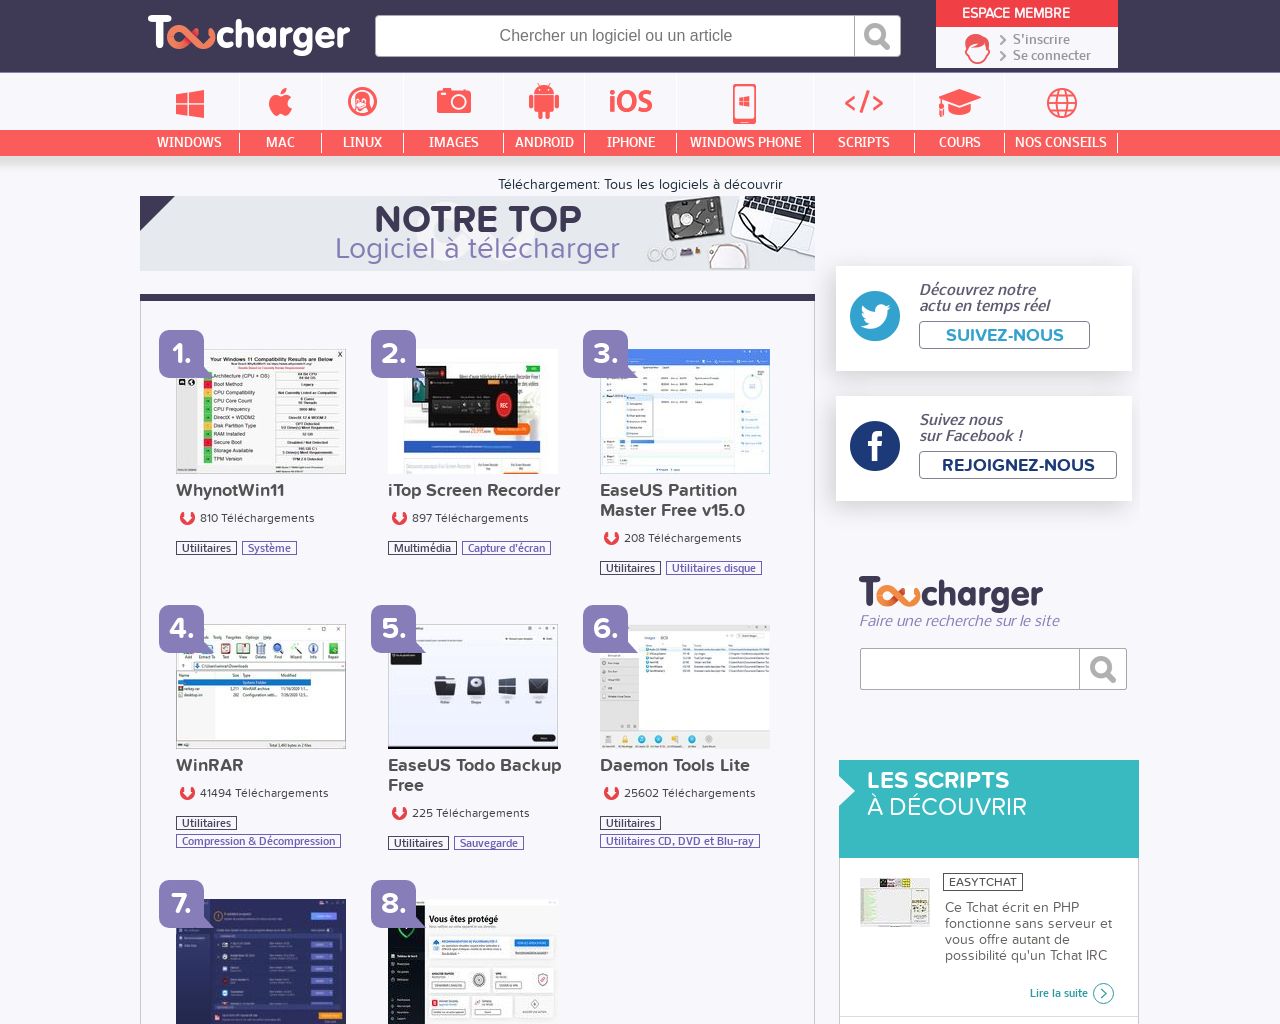 www.toucharger.com